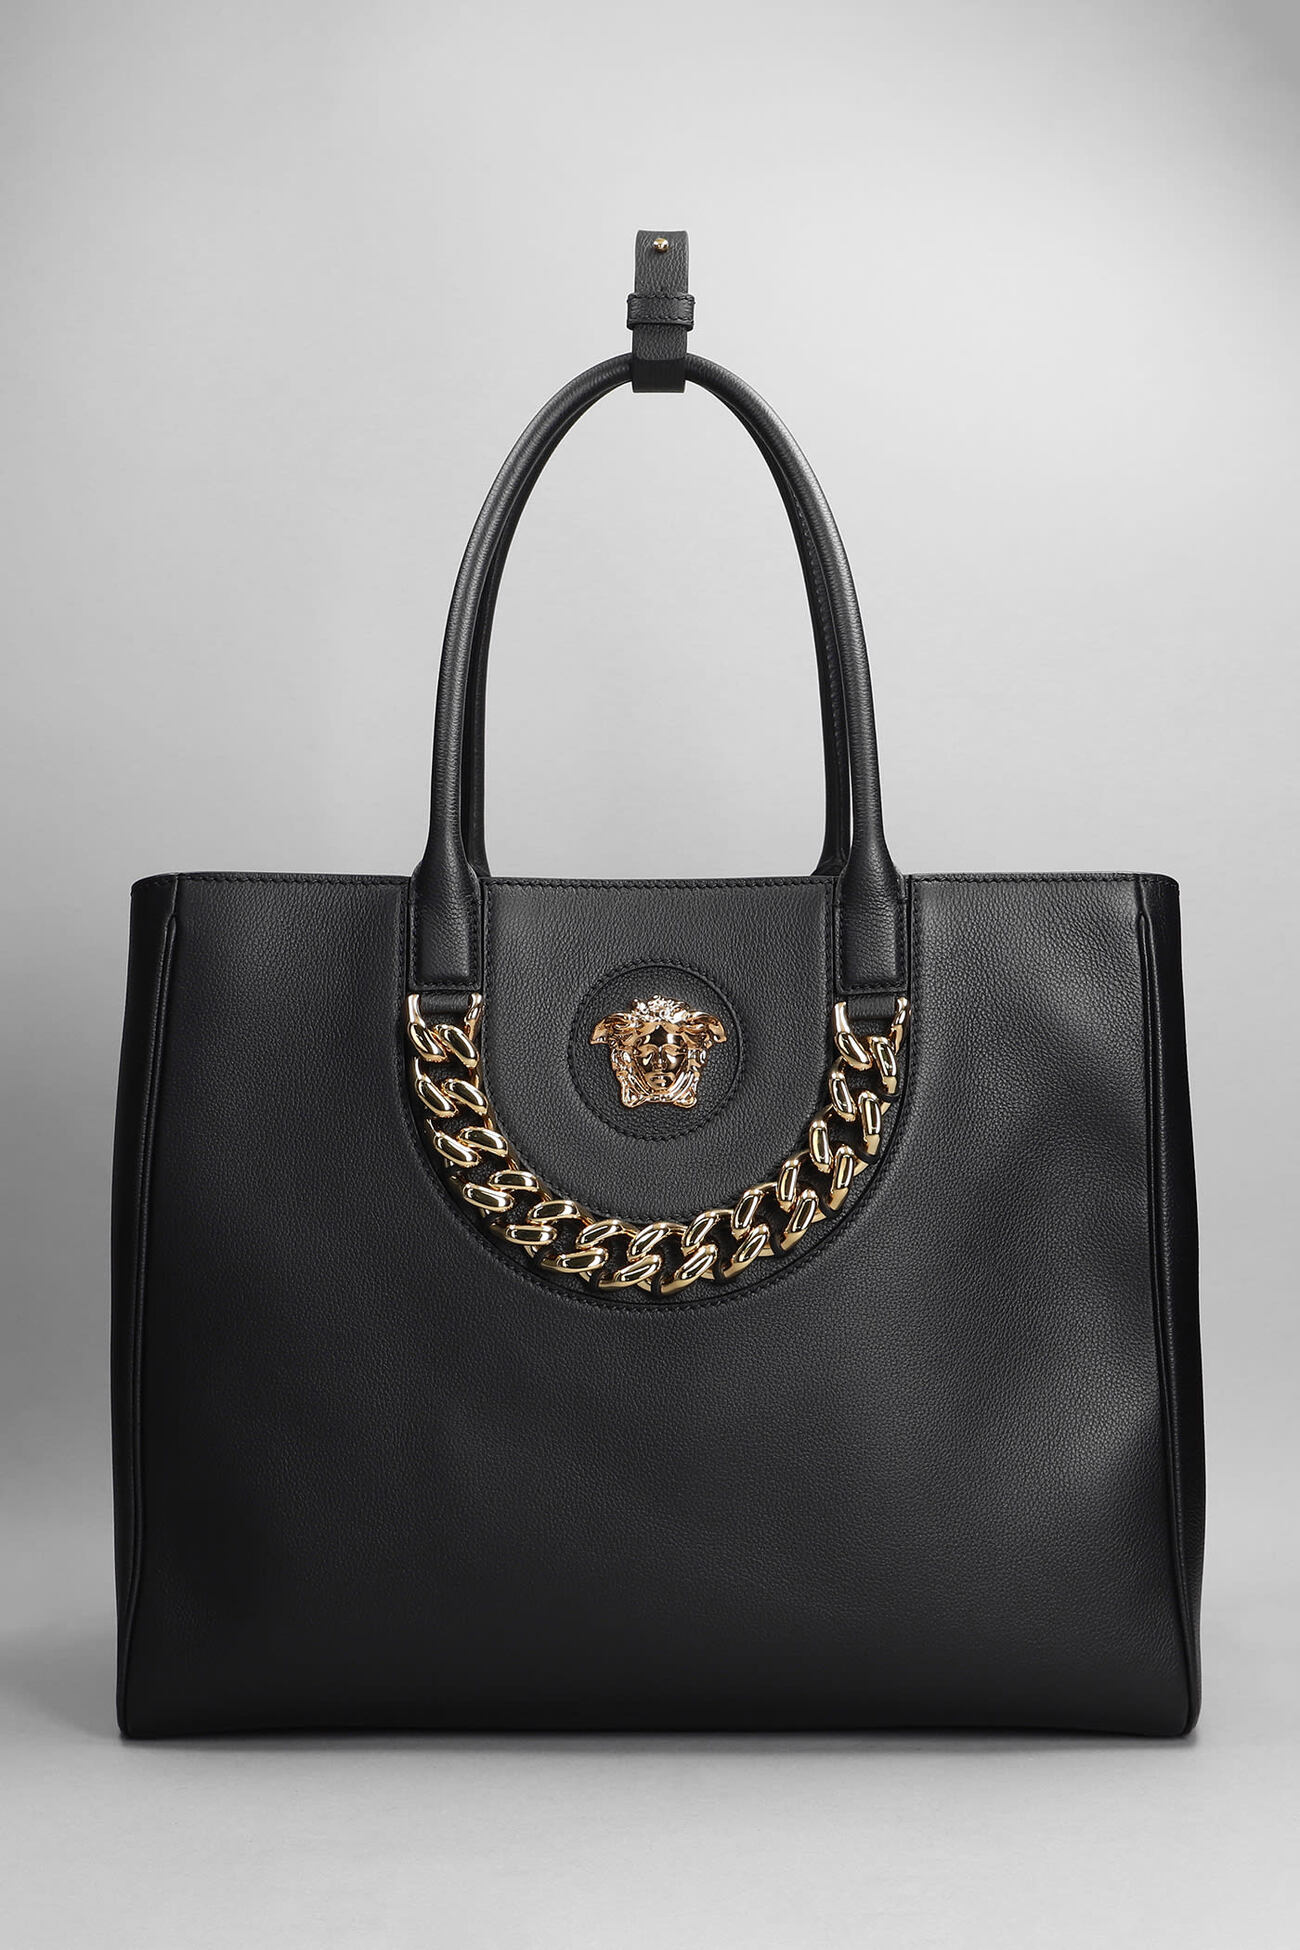 Versace Tote In Black Leather